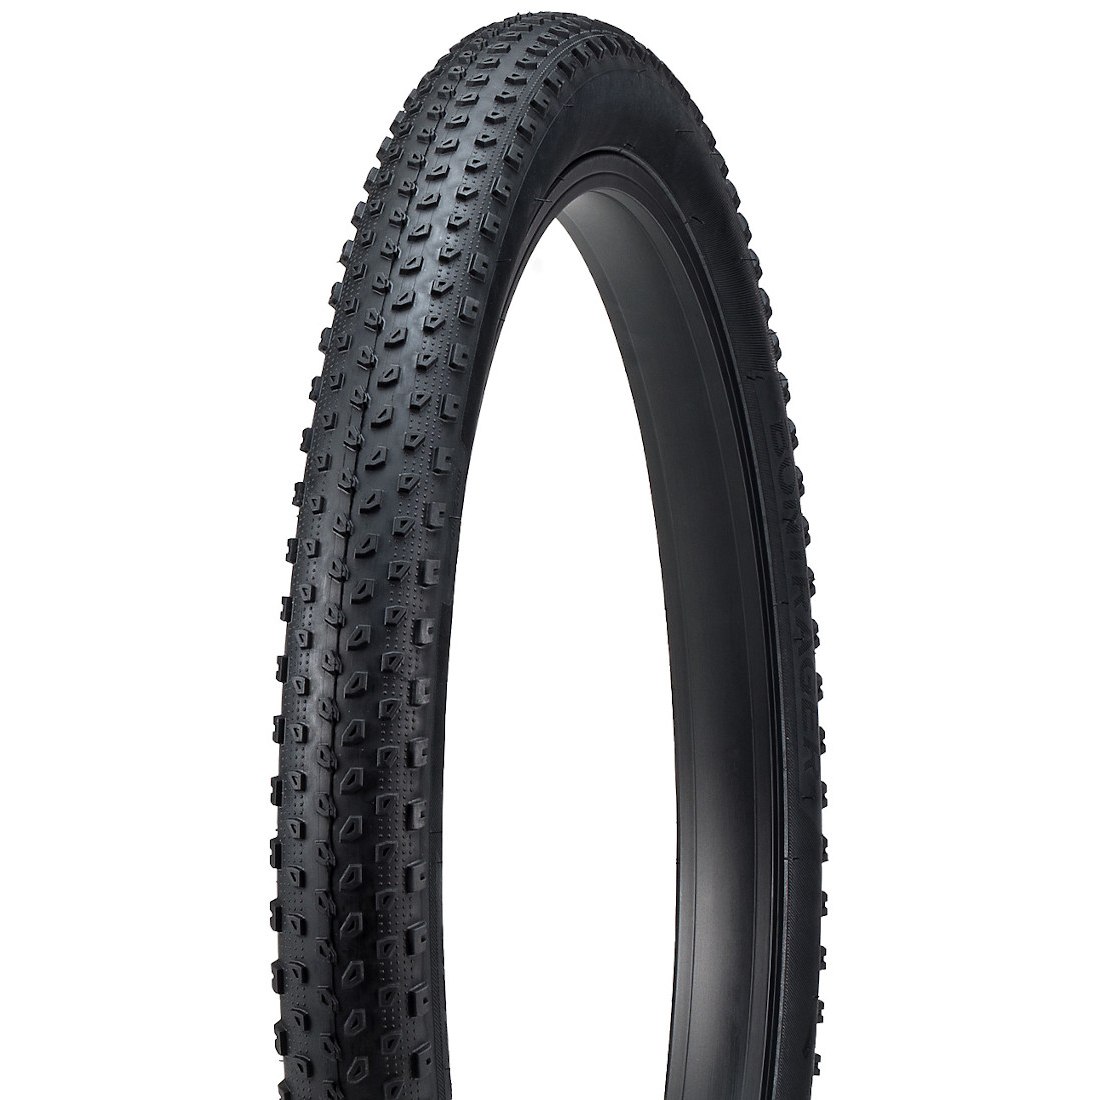 Productfoto van Bontrager XR1 Kids&#039; Mountain Wired Bead Tire - 24x2.25 Inches